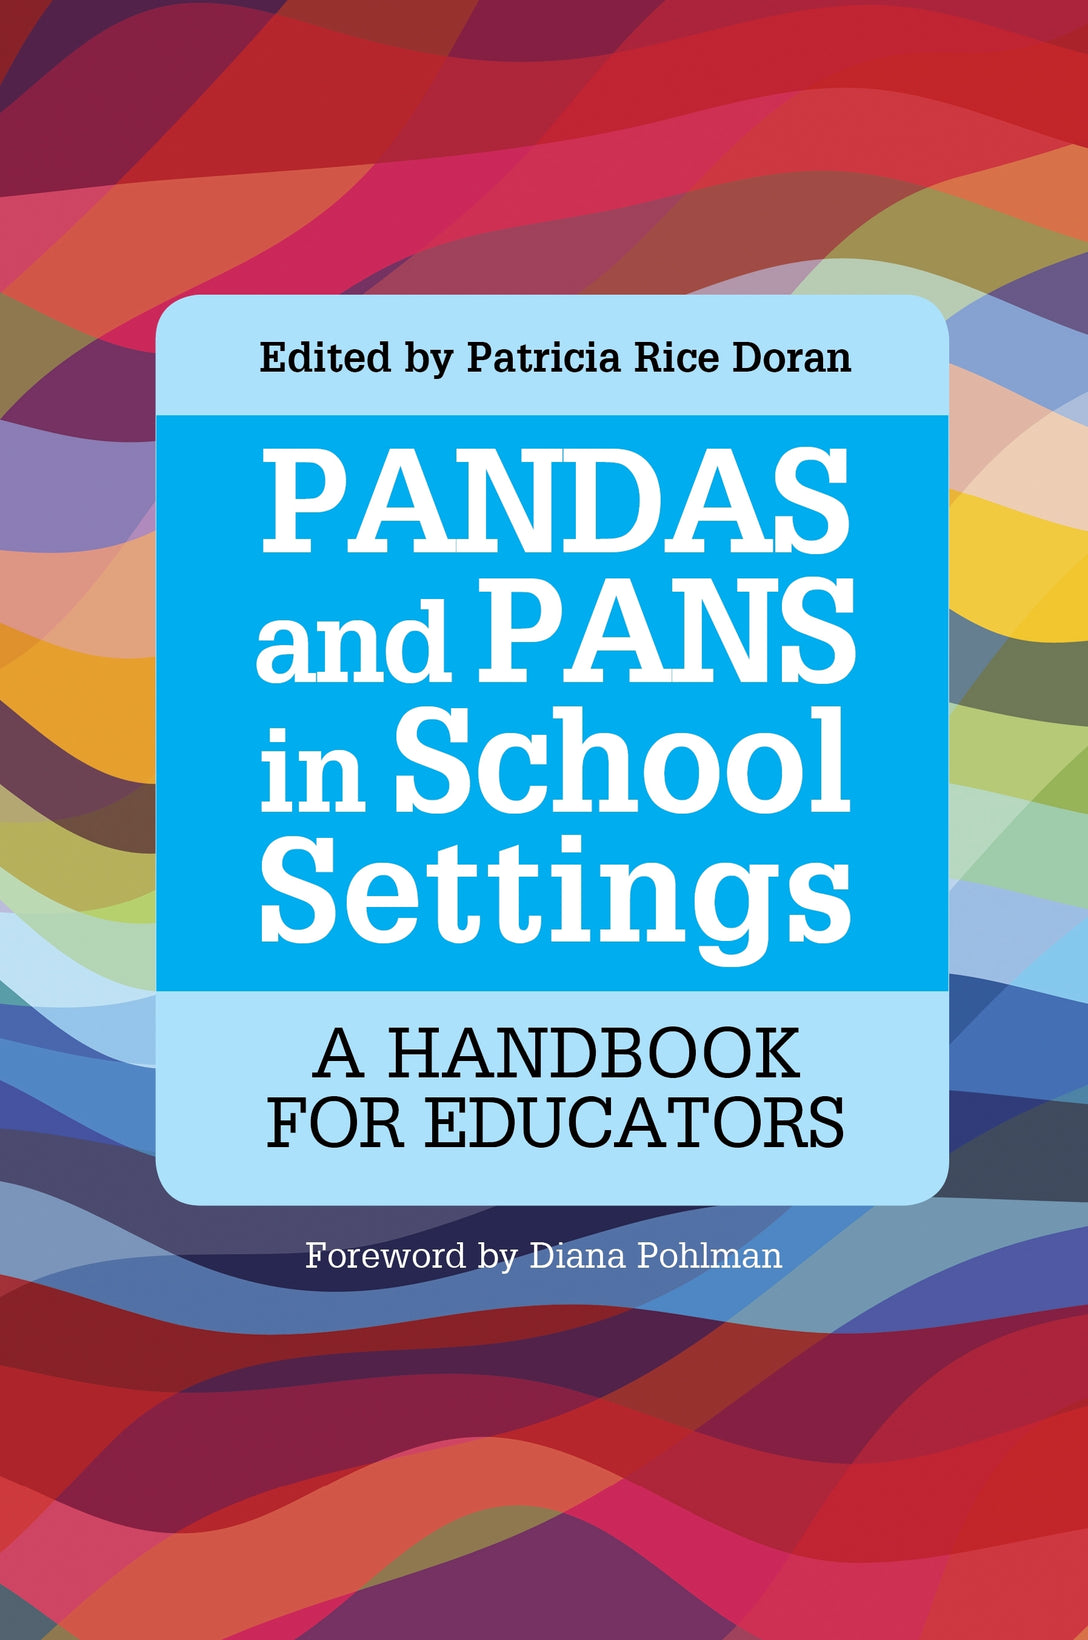 PANDAS and PANS in School Settings by Patricia Rice Doran, Diana Pohlman, No Author Listed